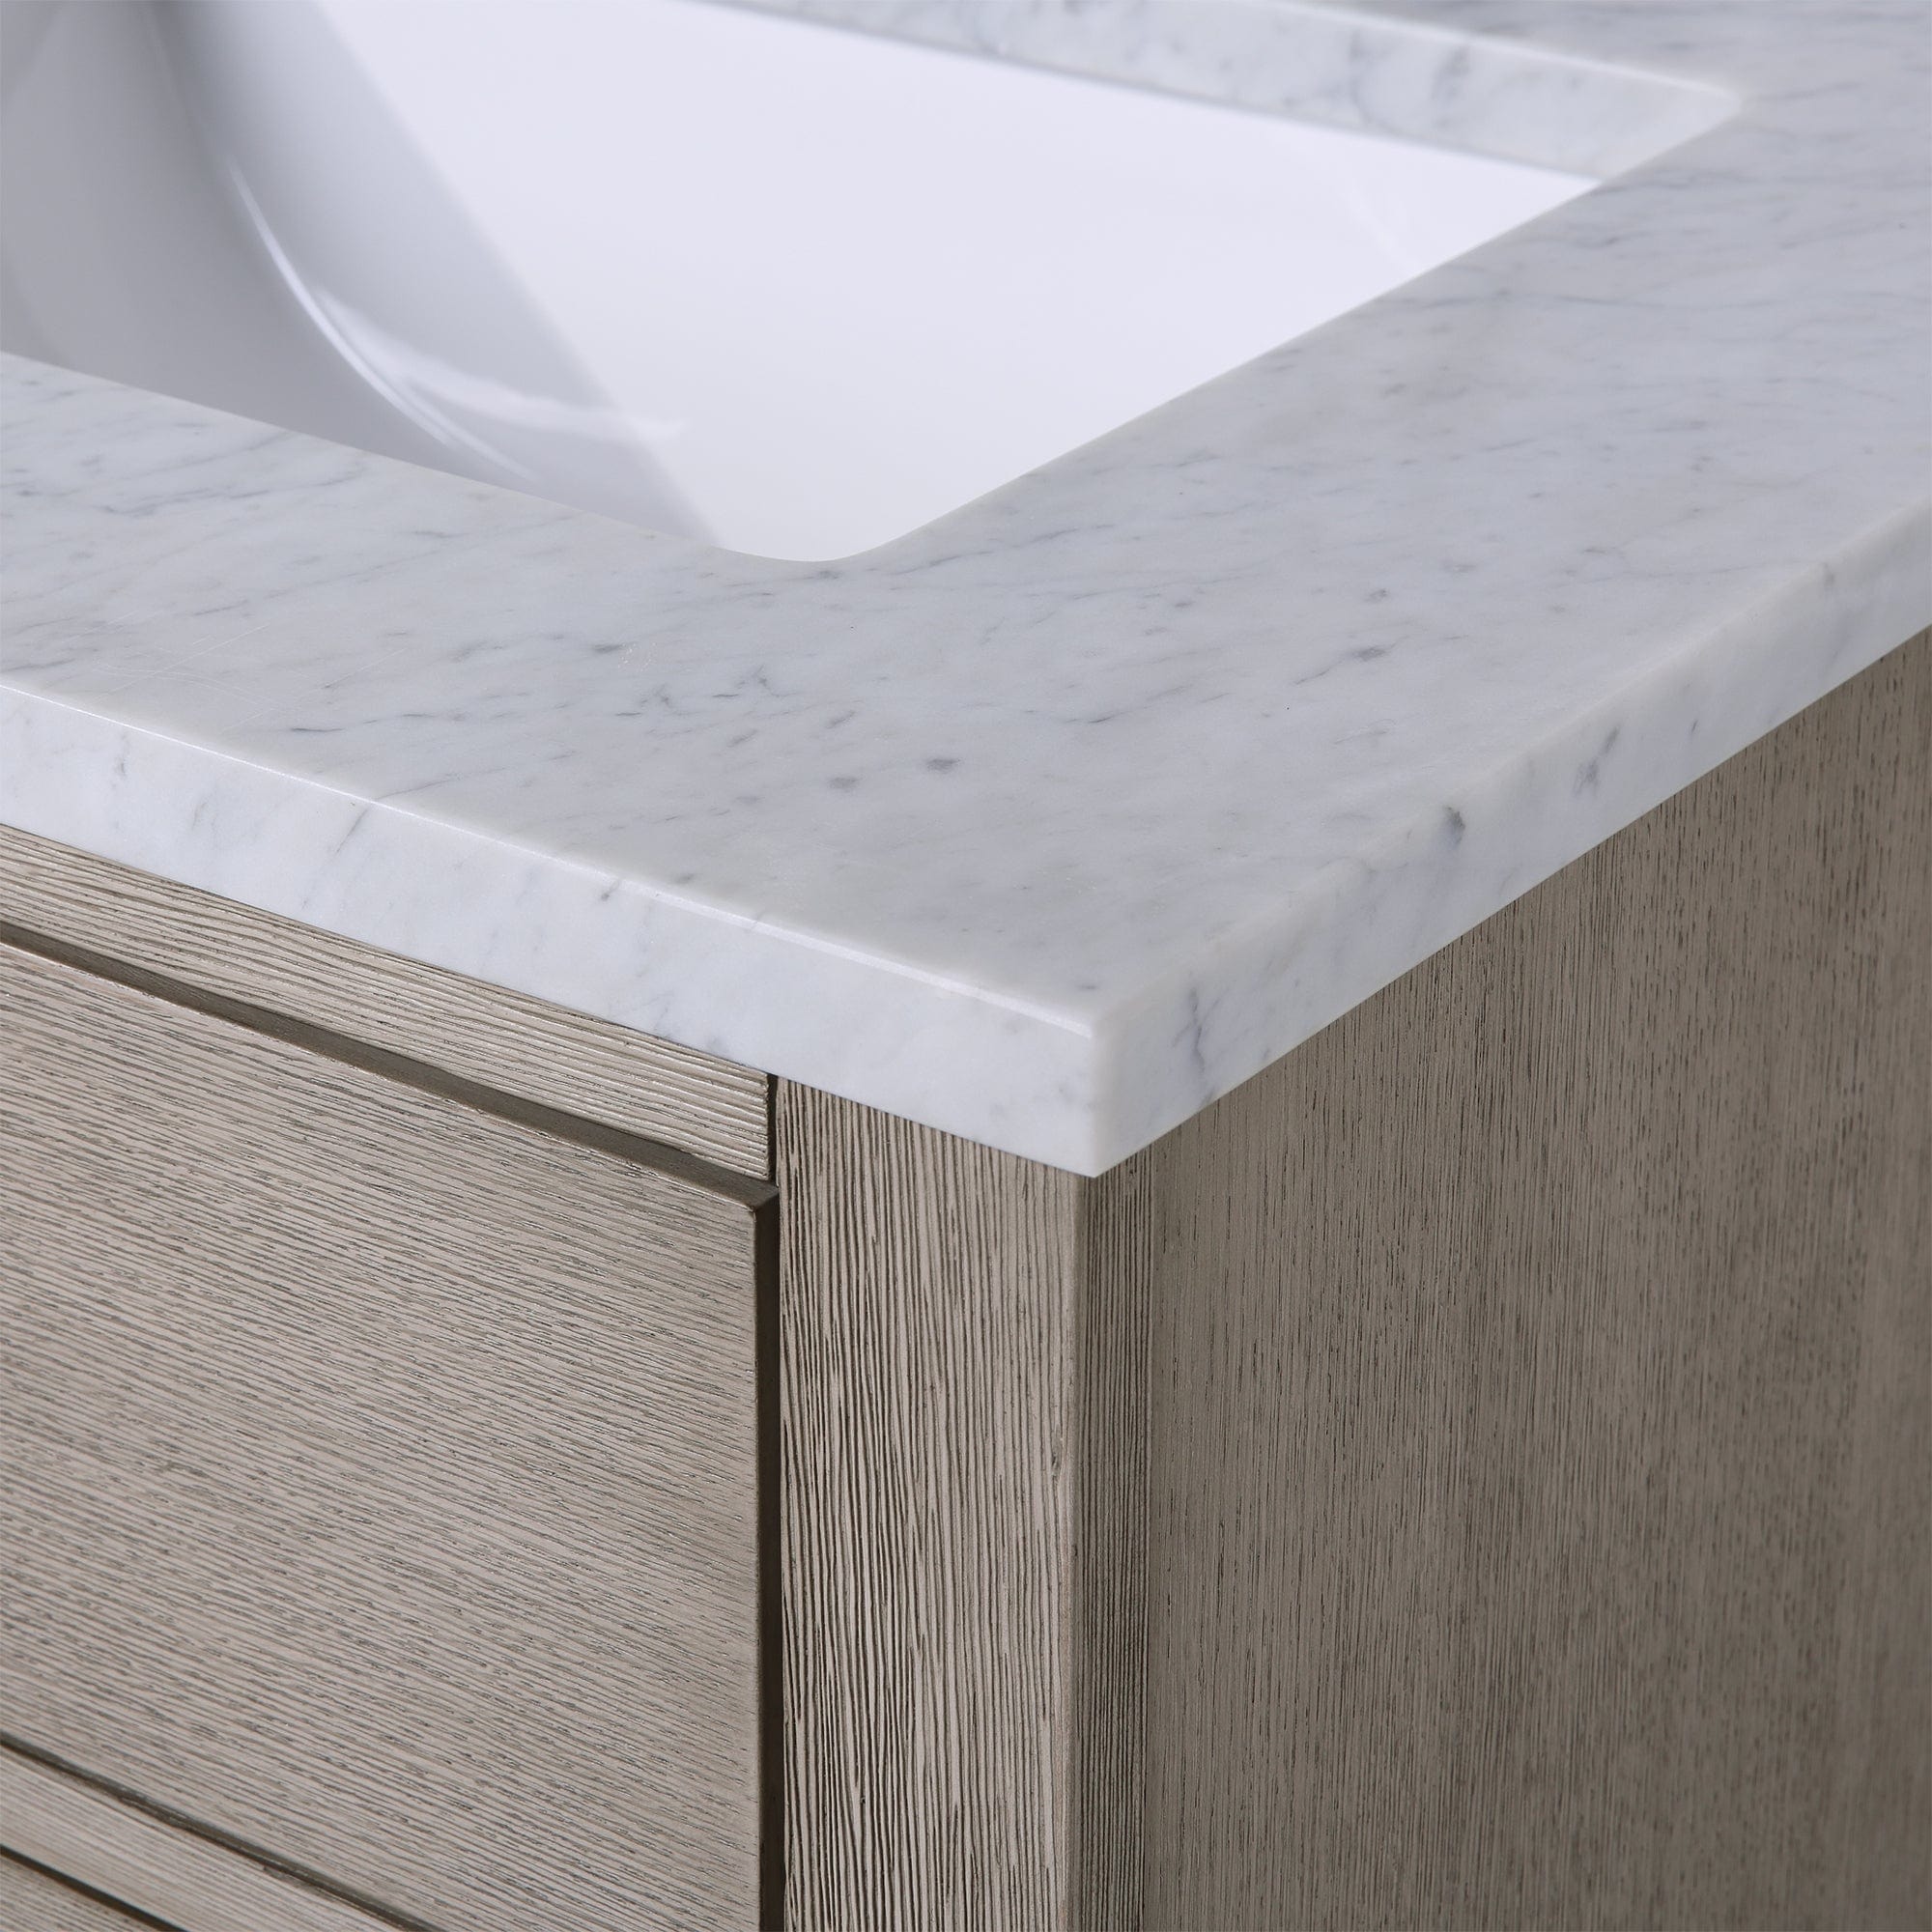 Chestnut 60 In. Double Sink Carrara White Marble Countertop Vanity In Grey Oak with Mirrors - Molaix732030764798CH60CW03GK-R21000000